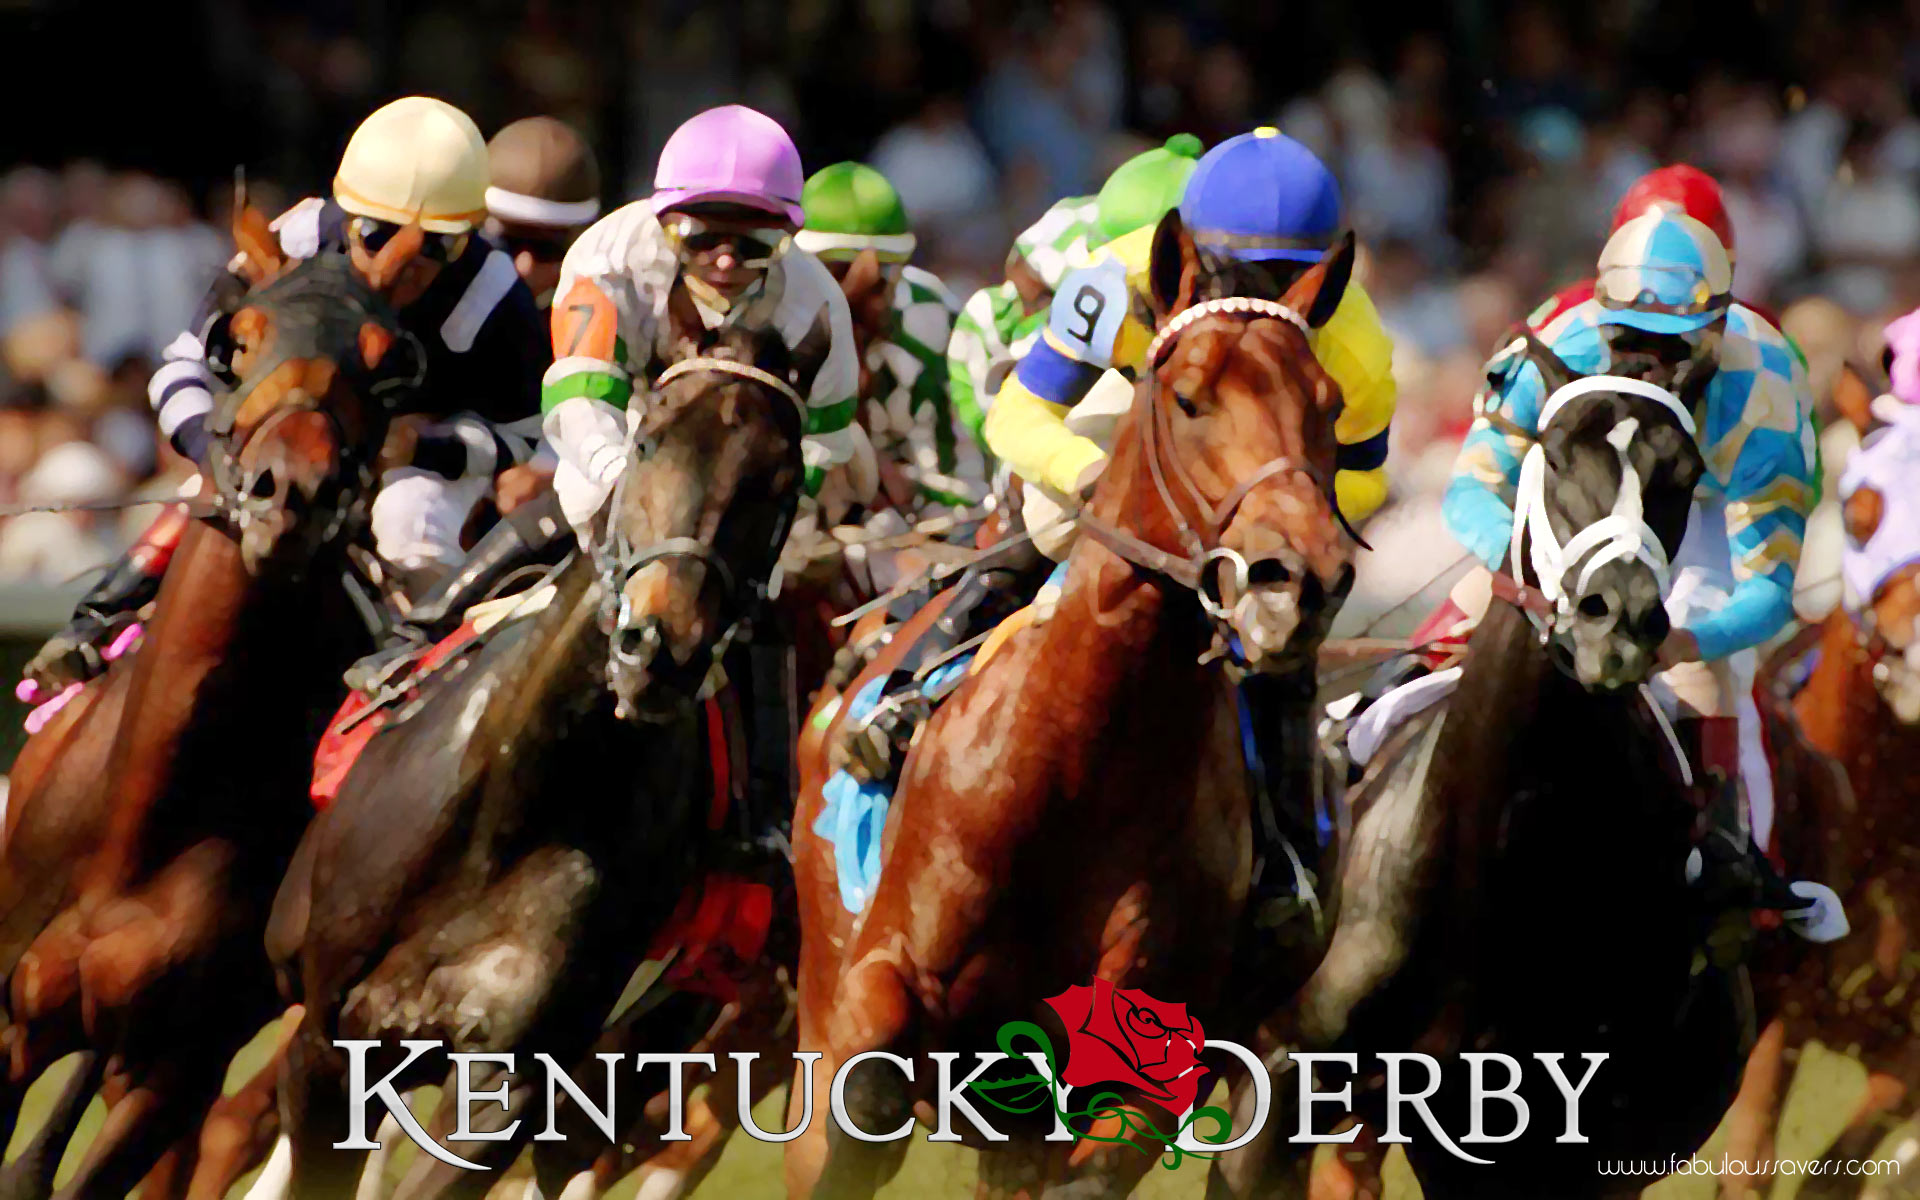  Roses Kentucky Derby computer desktop wallpapers pictures images